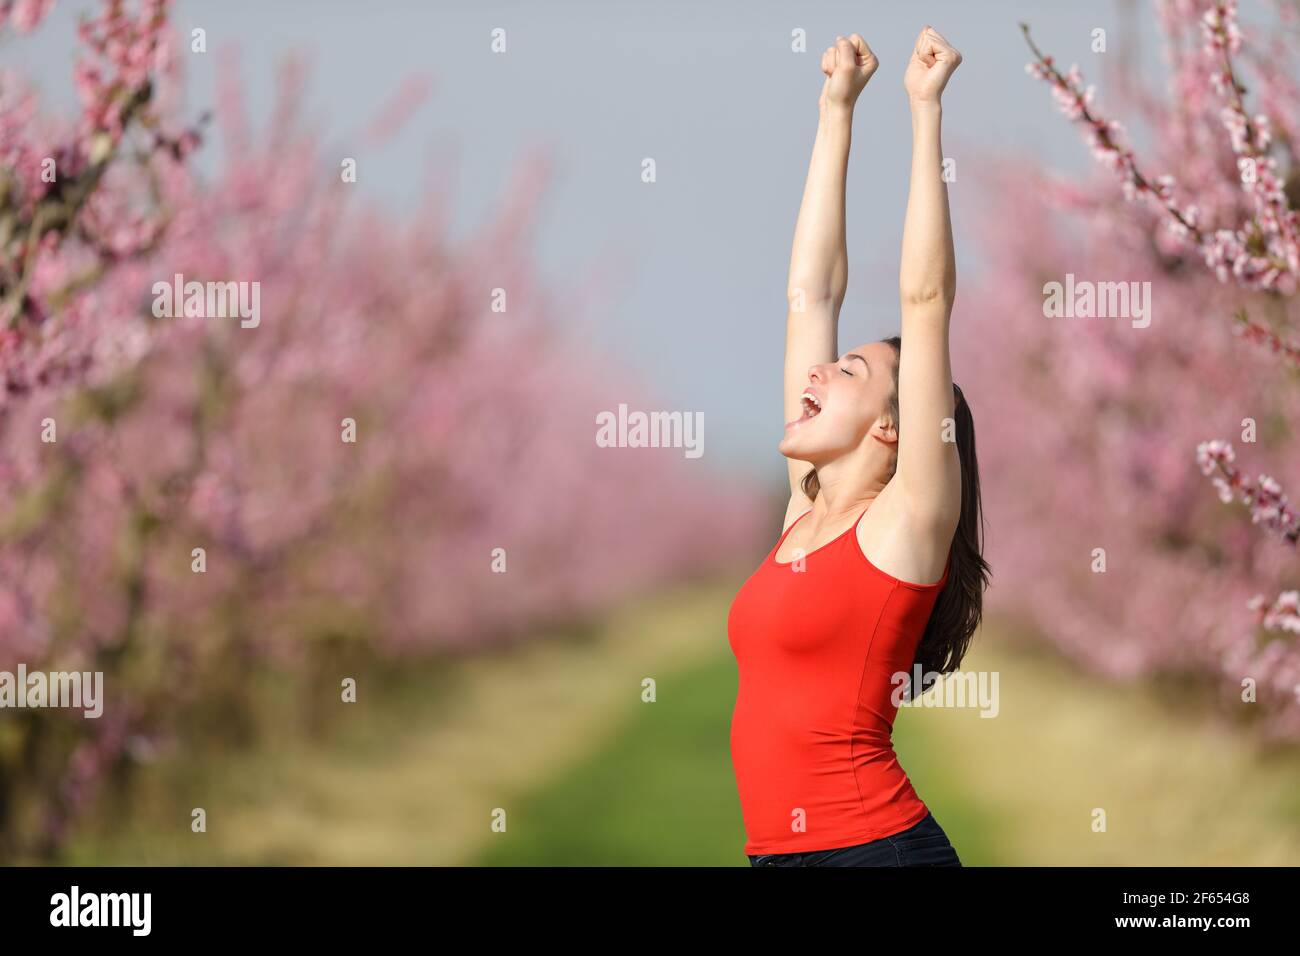 Excited woman in red raising arms with waxed armpit in a field celebrating vacation Stock Photo